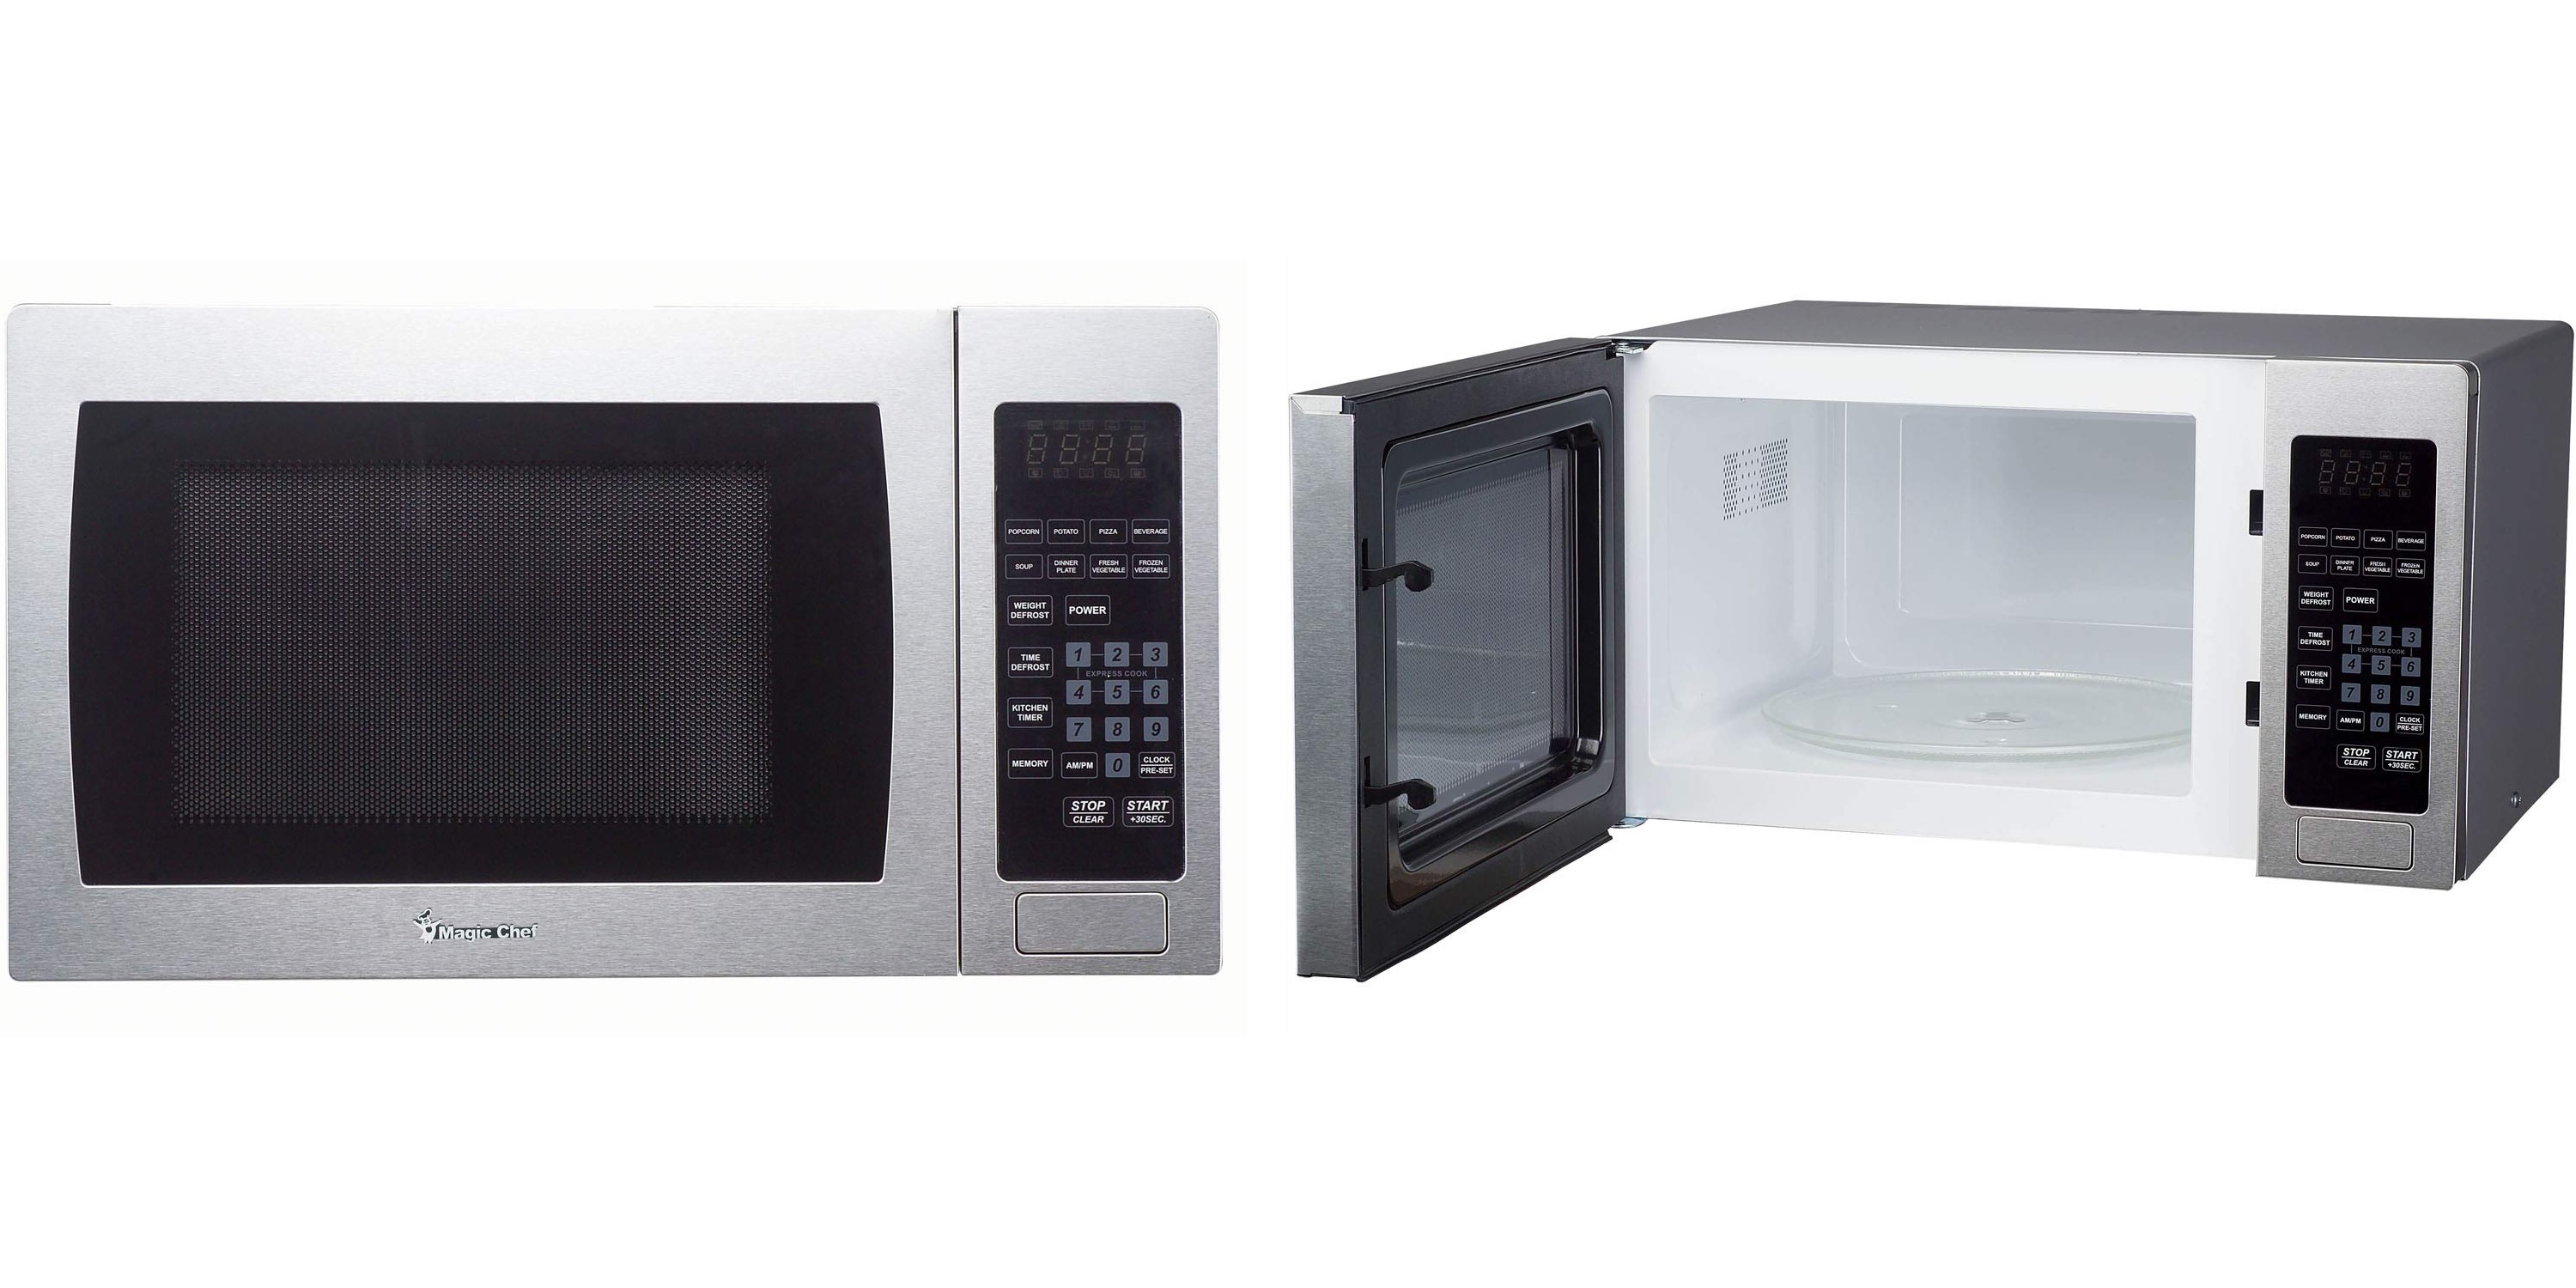 Pick up this Magic Chef Microwave for your dorm room at $58.50 (Reg. $90)